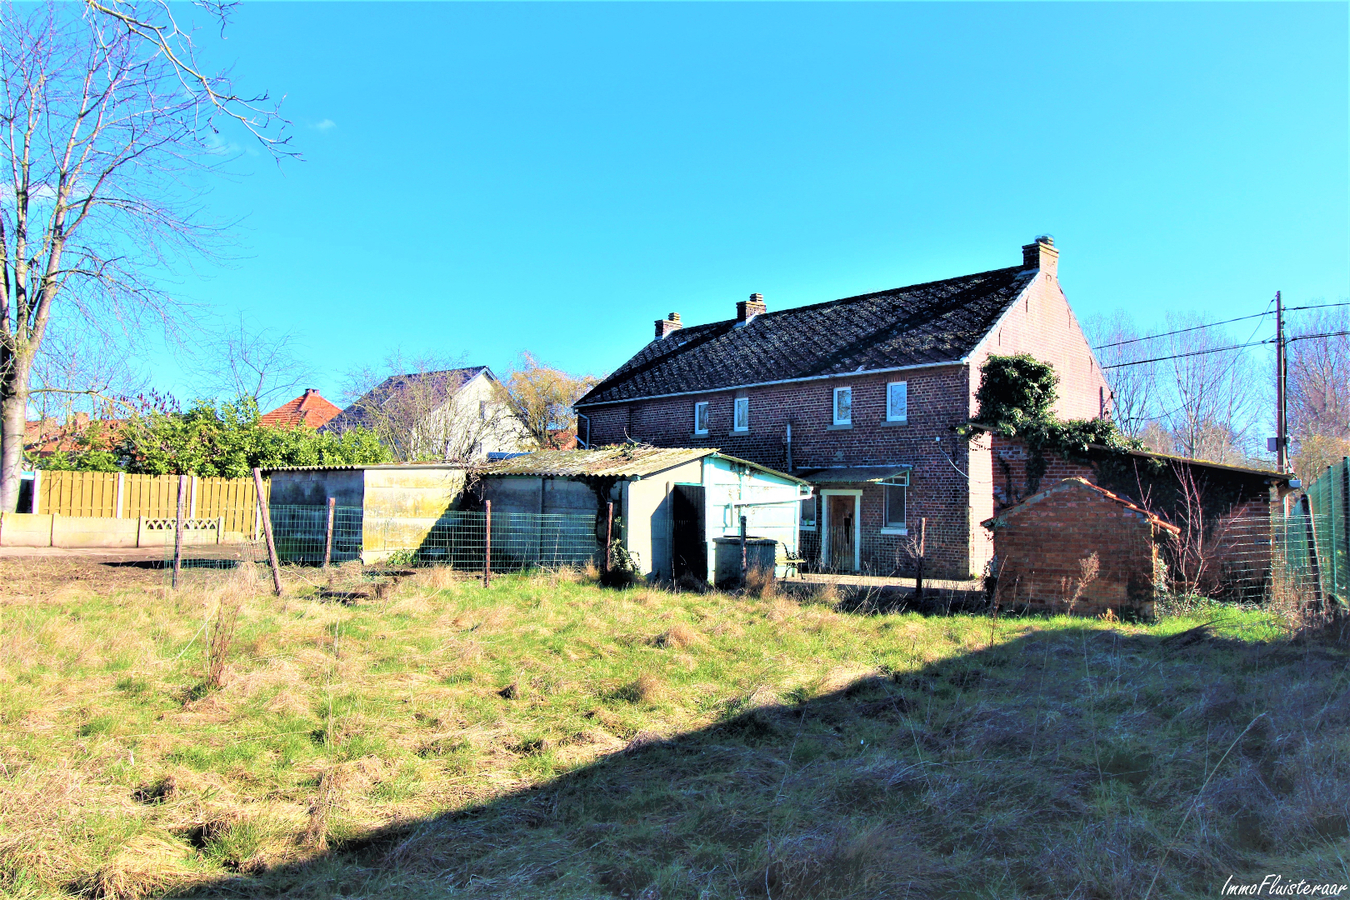 Property sold in Geetbets